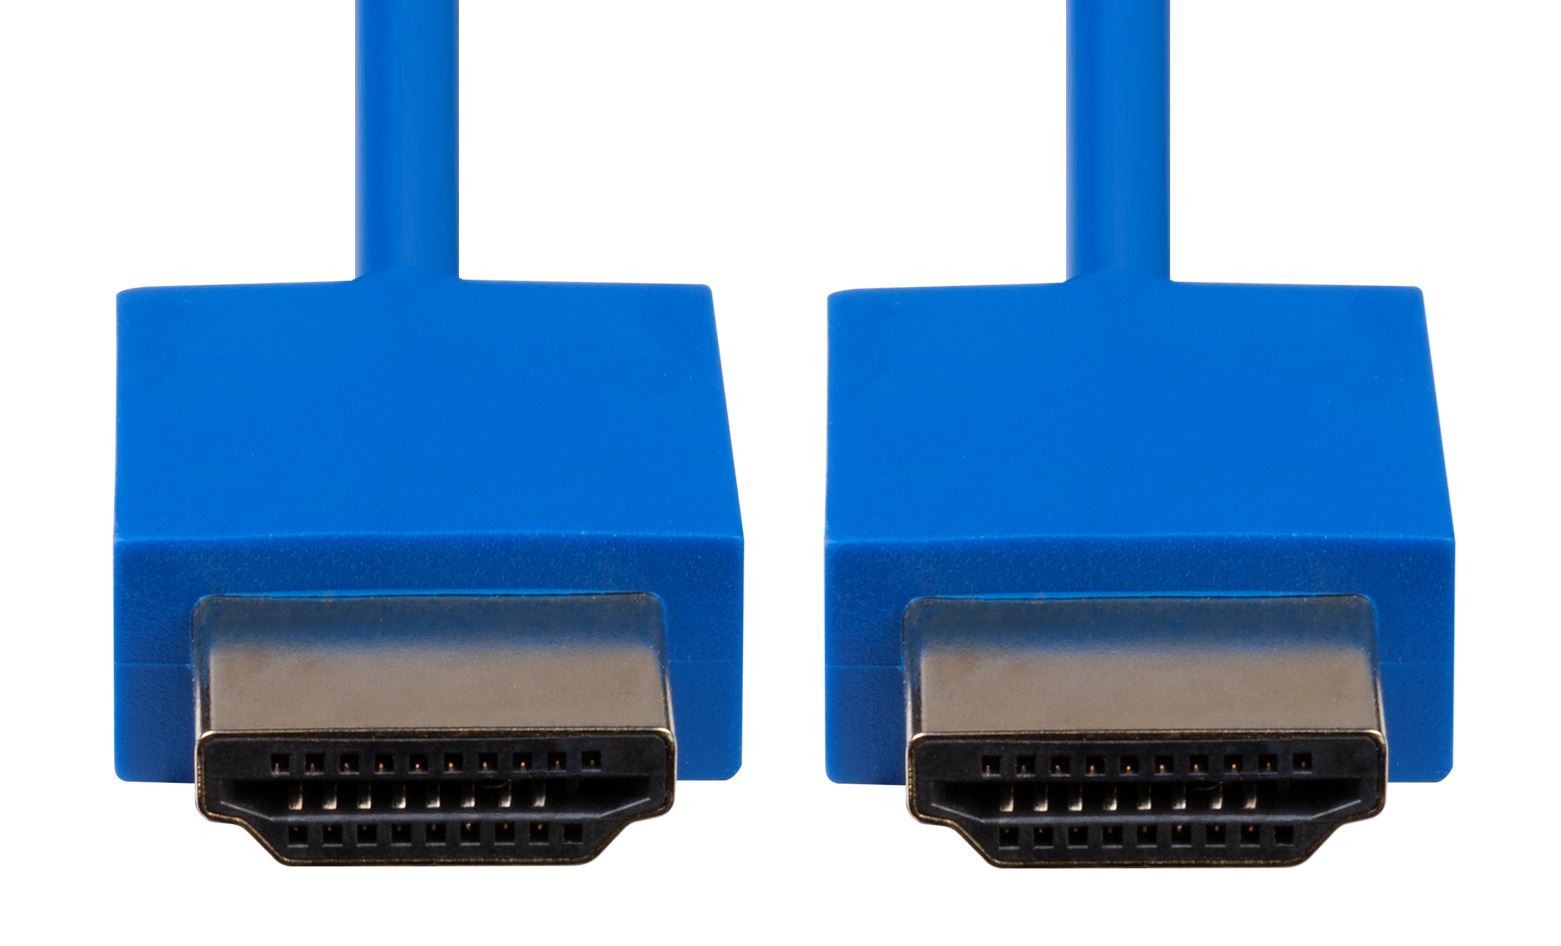 DYNAMIX_3M_HDMI_BLUE_Nano_High_Speed_With_Ethernet_Cable._Designed_for_UHD_Display_up_to_4K2K@60Hz._Slimline_Robust_Cable._Supports_CEC_2.0,_3D,_&_ARC._Supports_Up_to_32_Audio_Channels. 700